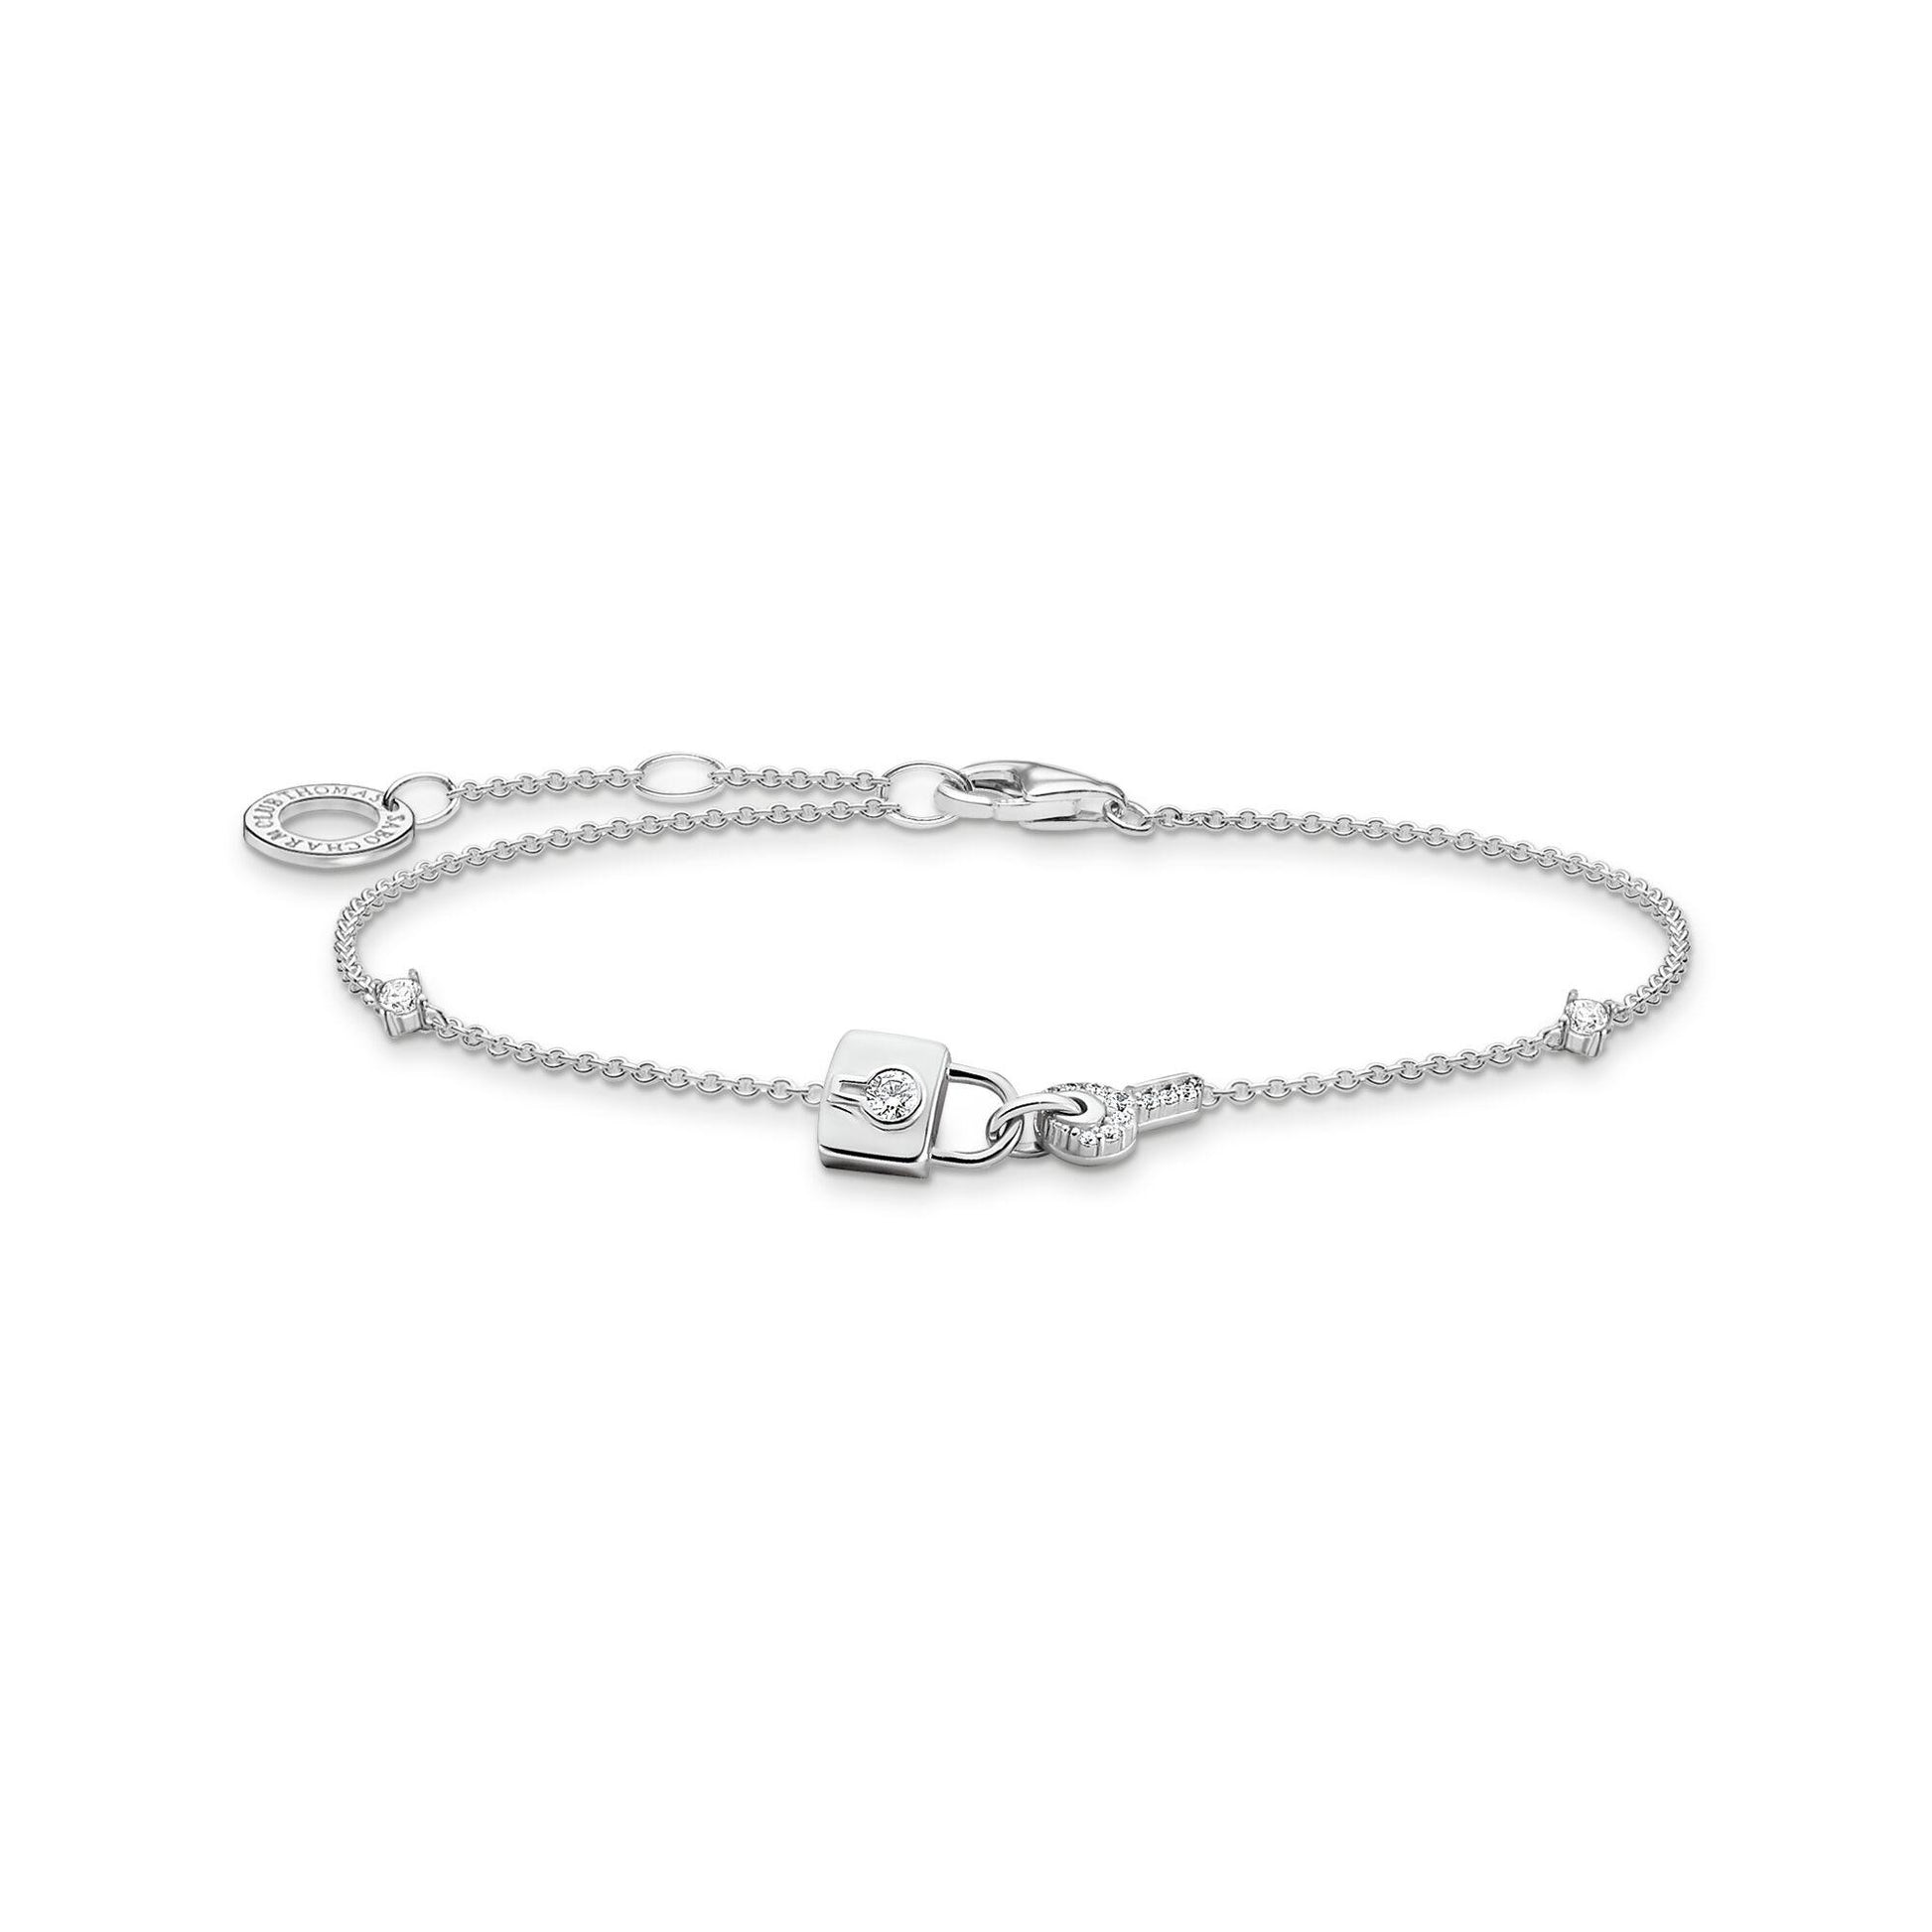 Thomas Sabo Sterling Silver Bracelet with Cubic Zirconia Lock and Key A2040-051-14 - Judith Hart Jewellers